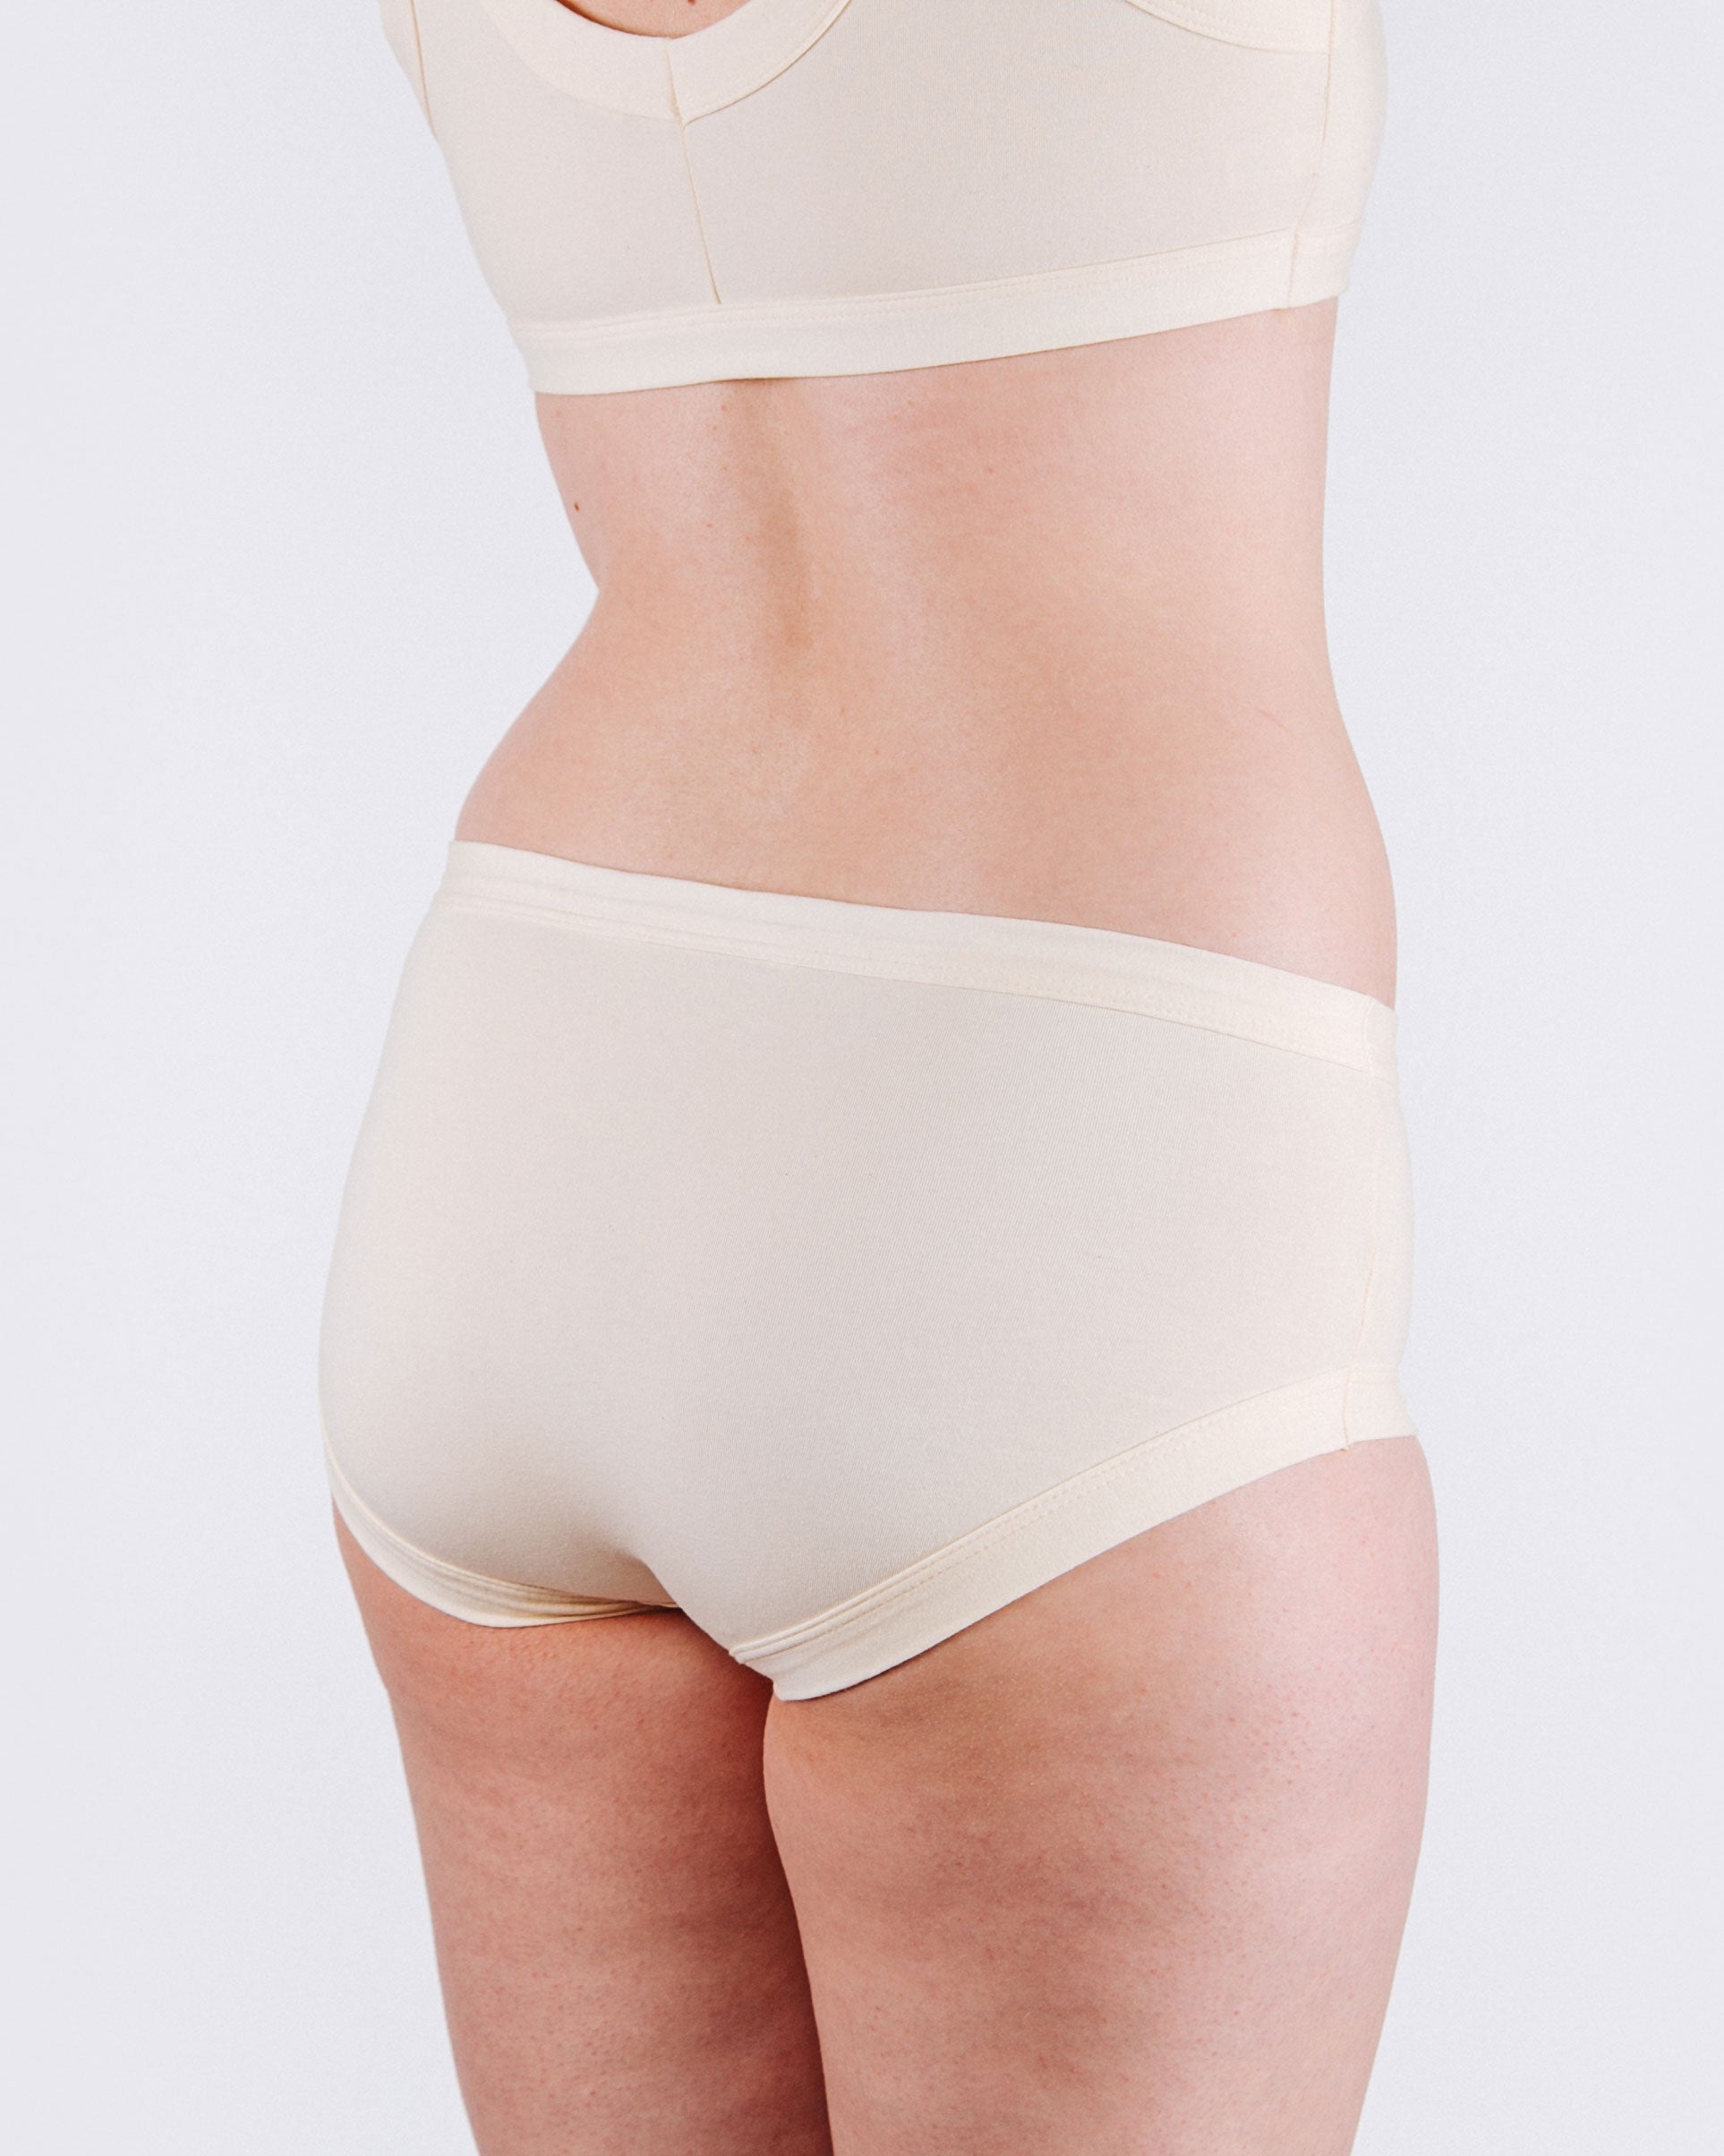 Fit photo from the back of Thunderpants organic cotton Hipster style underwear in off-white vanilla, showing a wedgie-free bum, on a model.